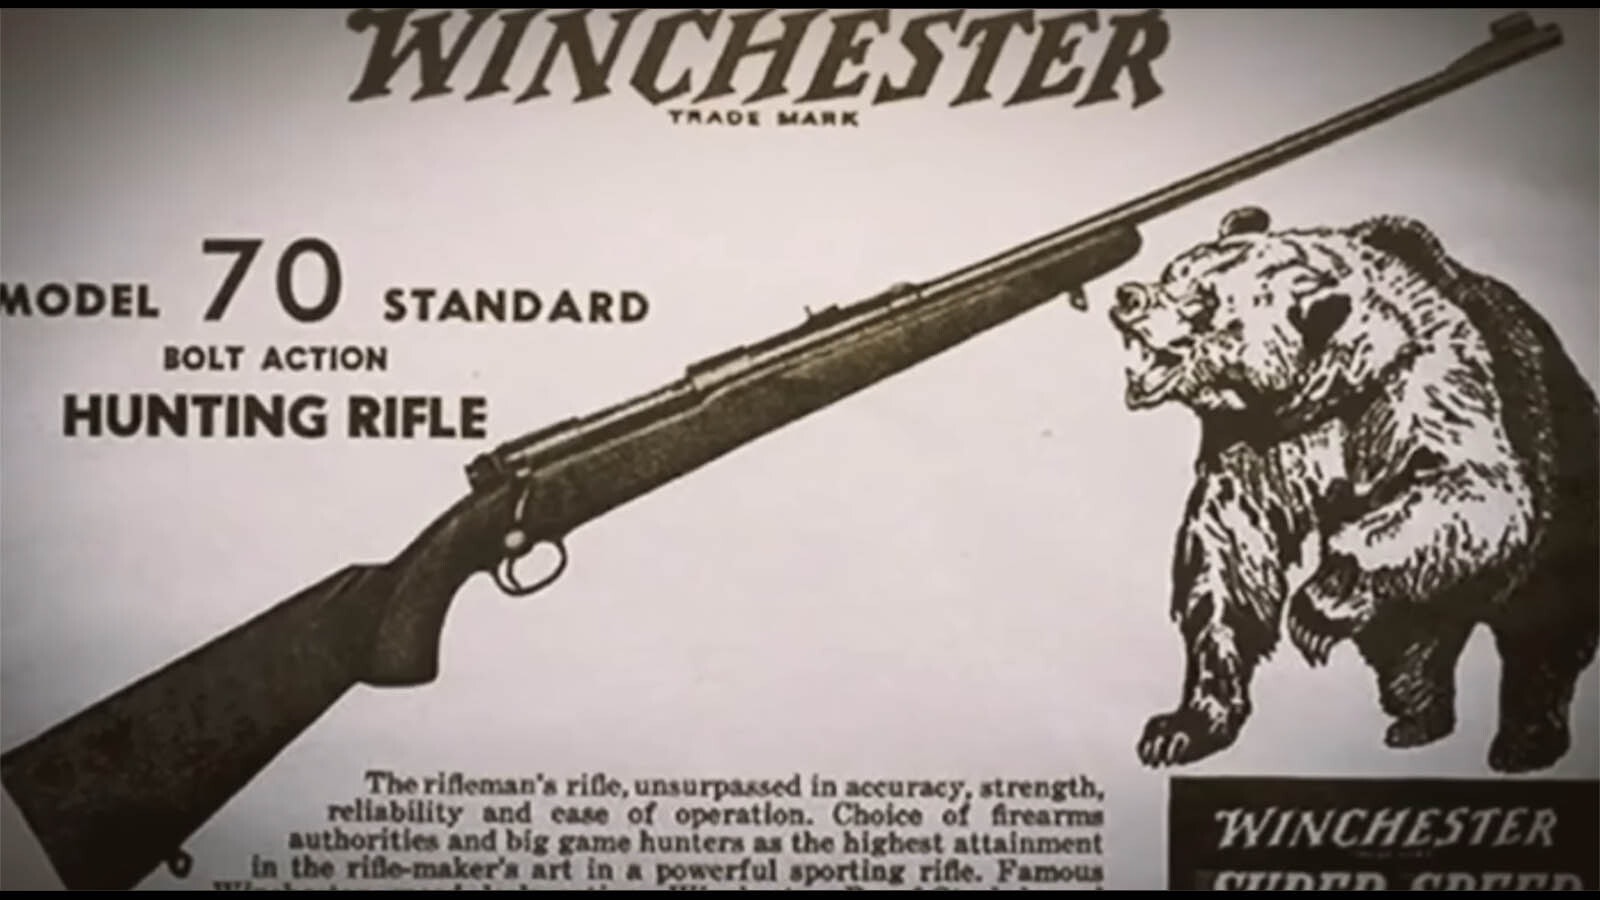 An ad for the Winchester Model 70 Standard rifle.